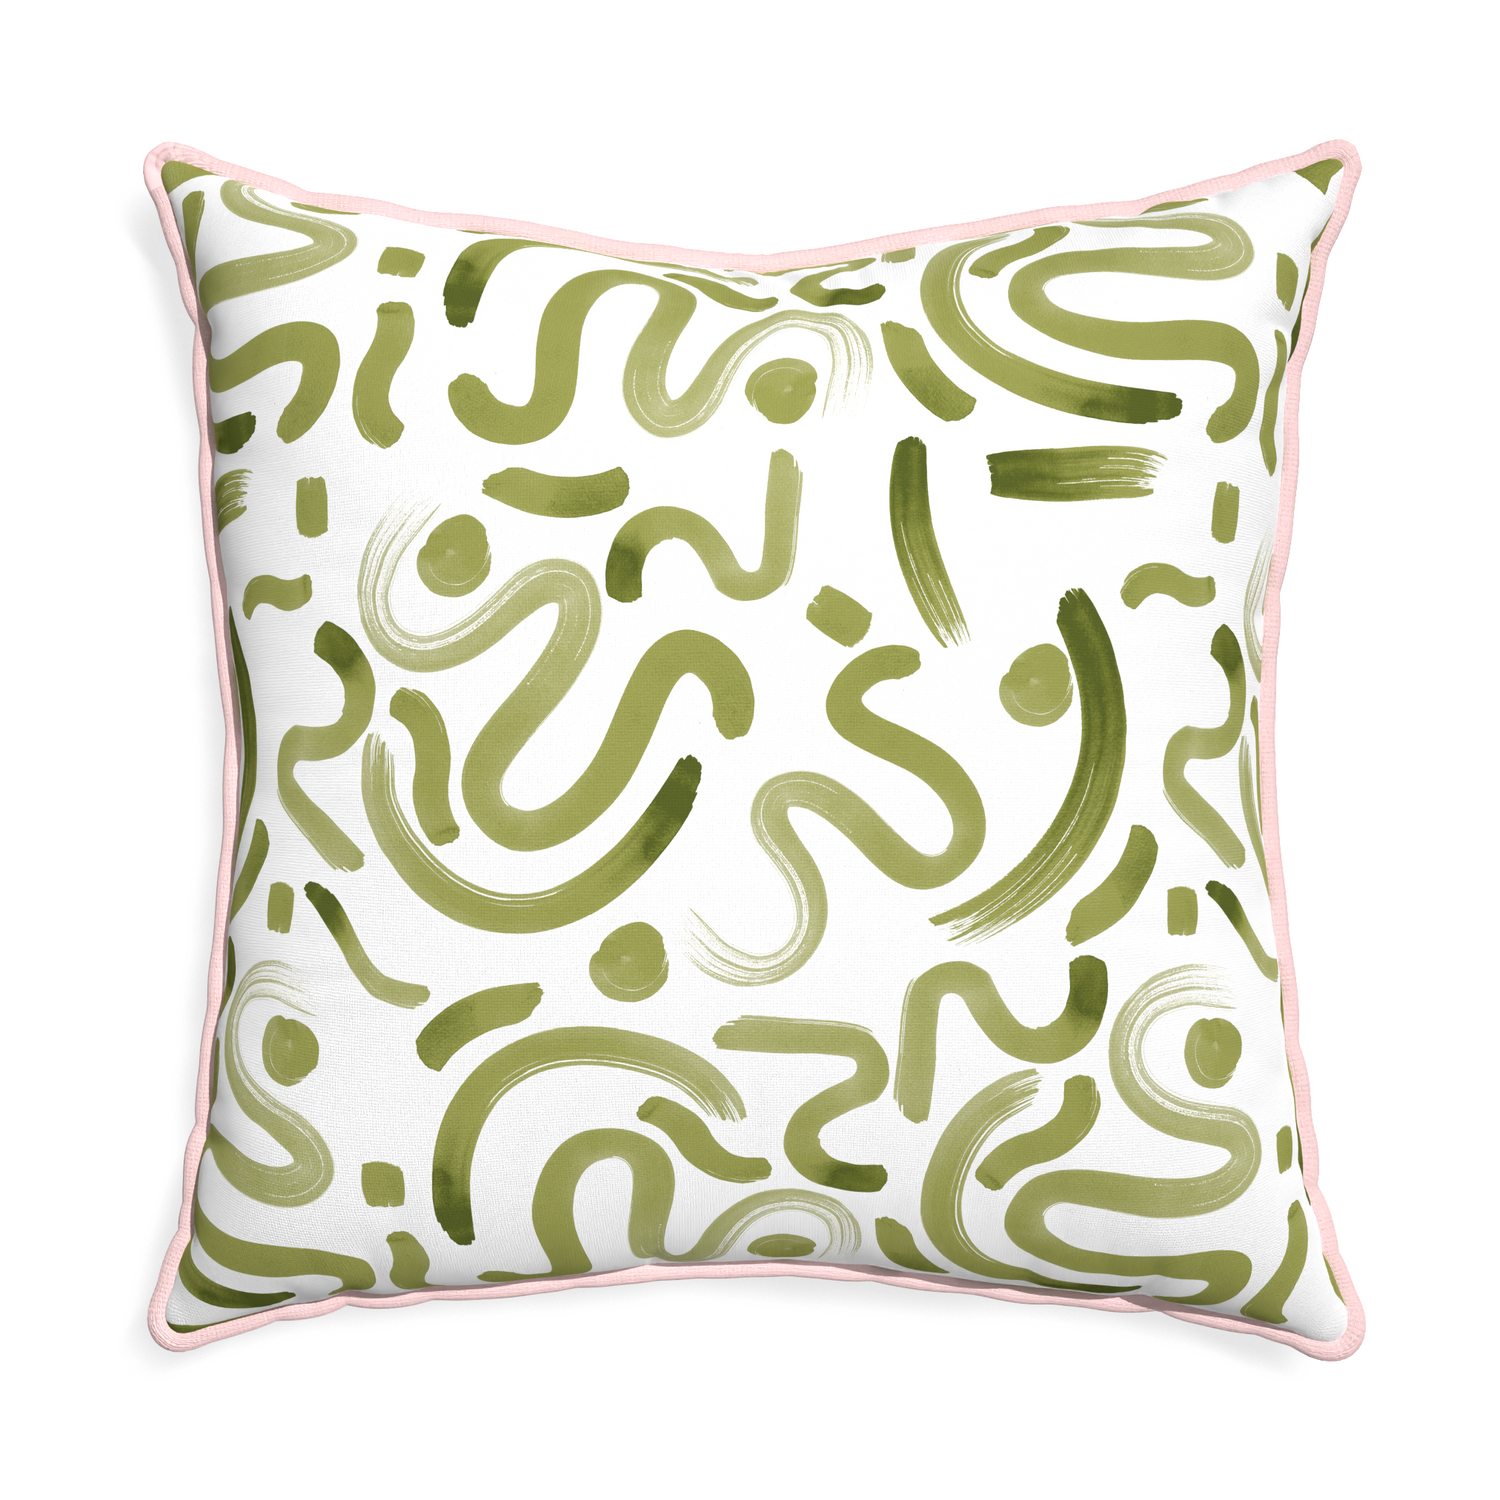 Euro-sham hockney moss custom pillow with petal piping on white background